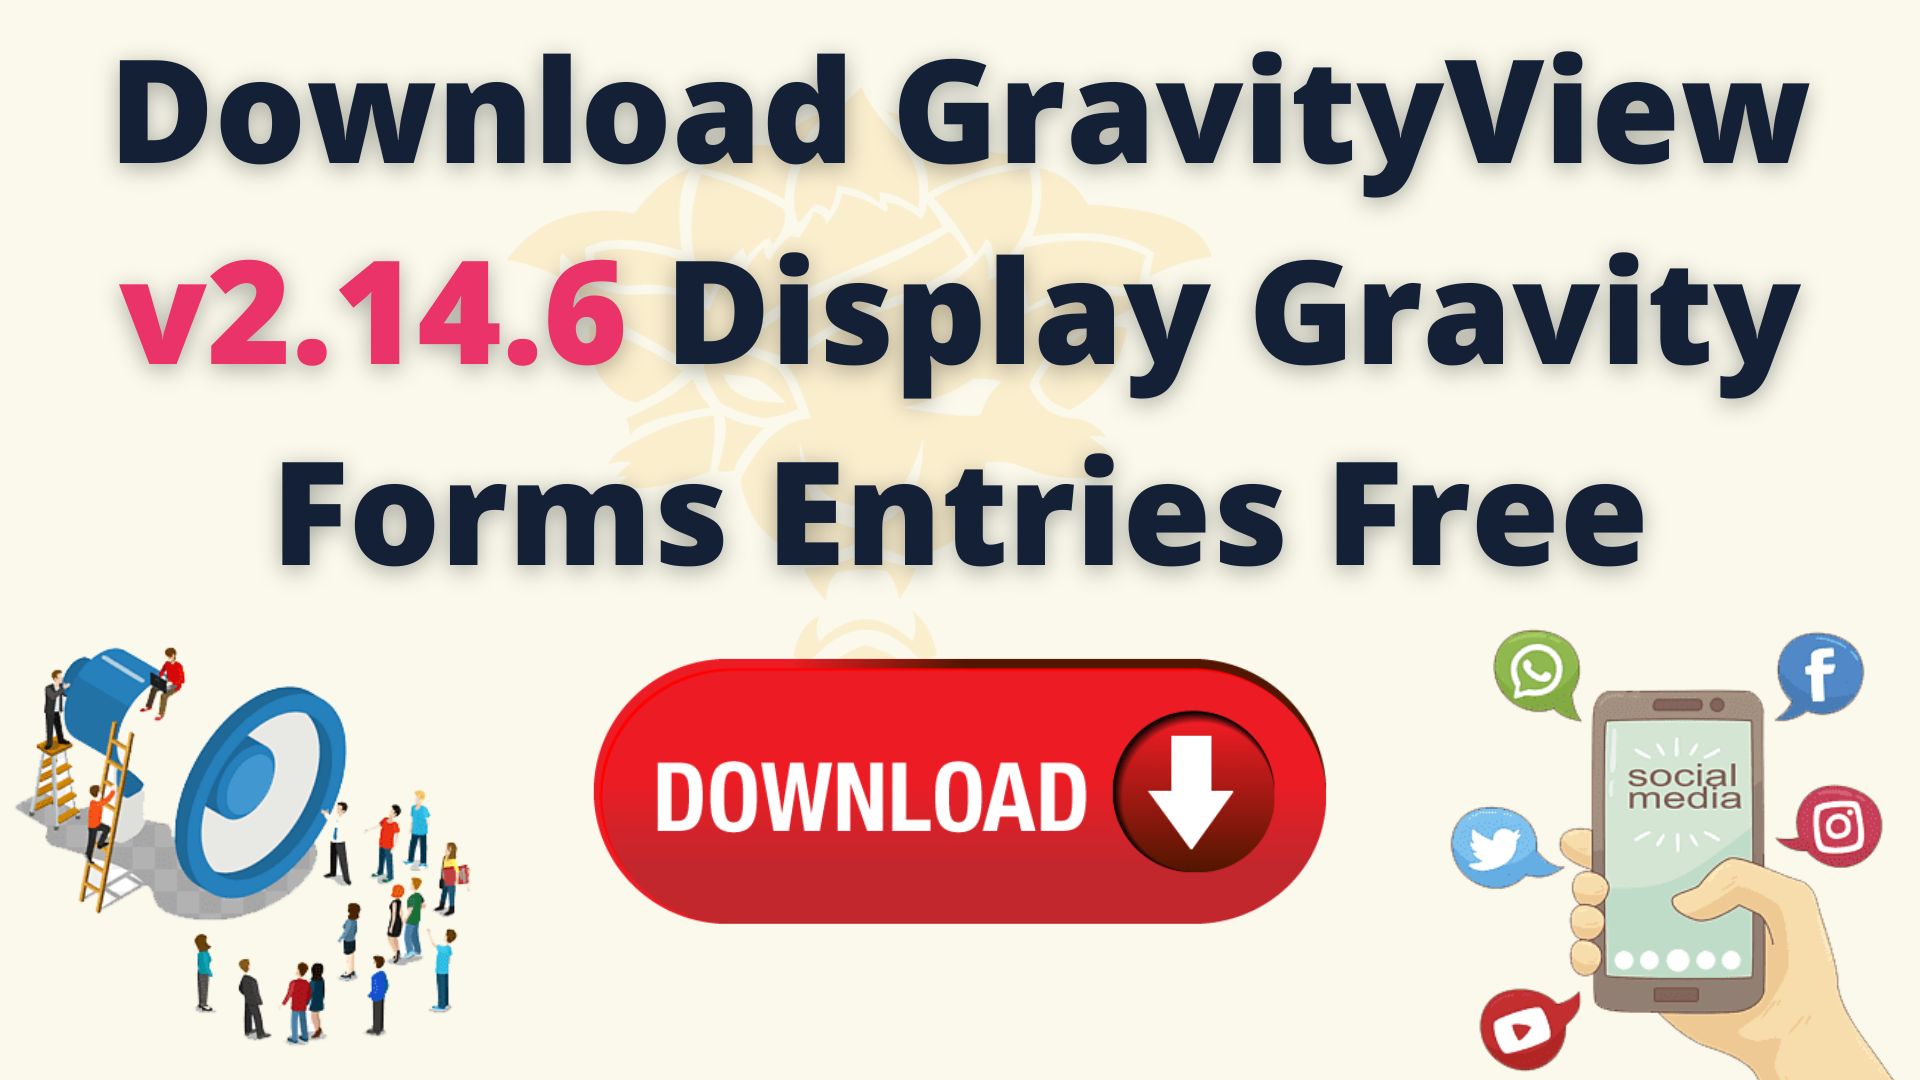 Download gravityview v2. 14. 6 forms entries free